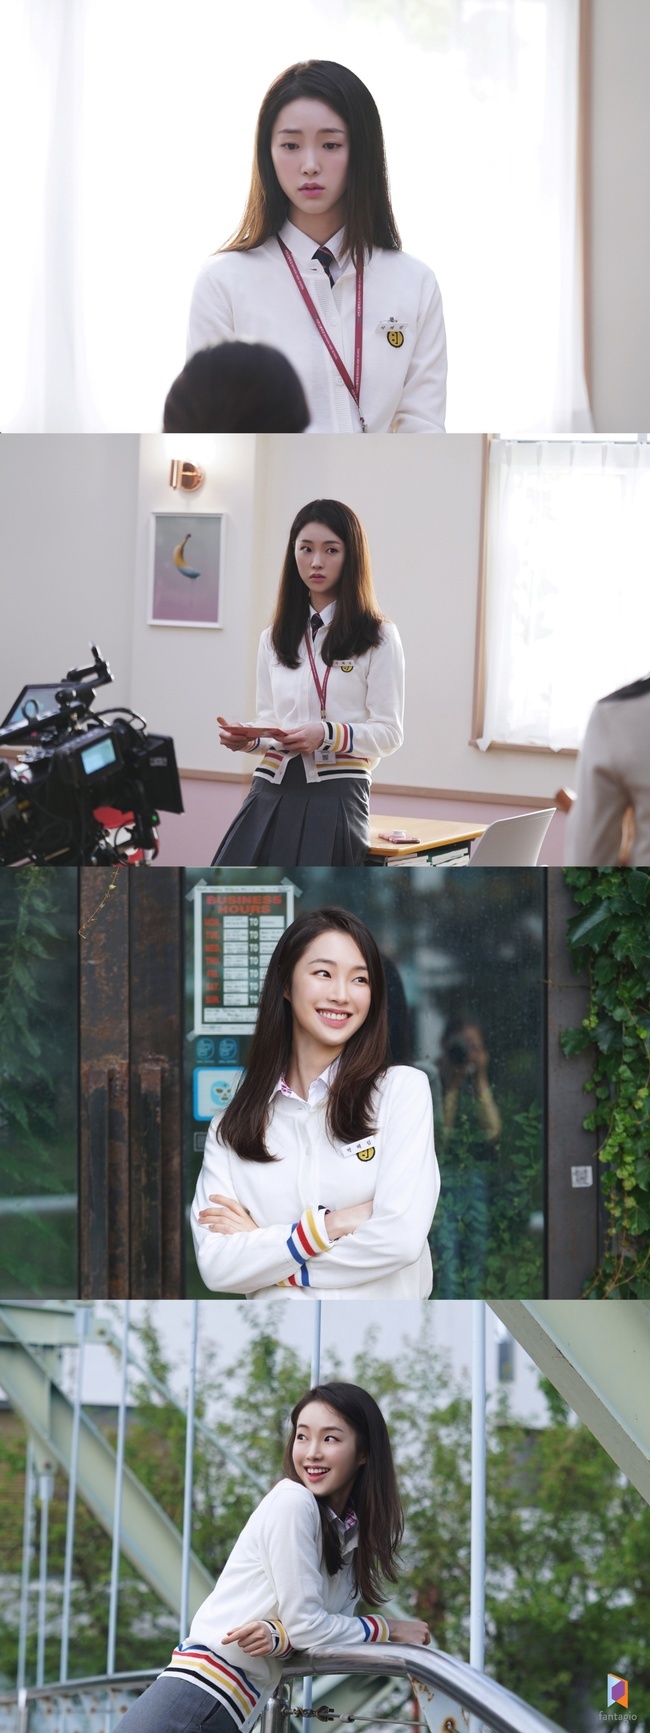 The new Kang Haelim Live on behind-the-scenes cut has been unveiled.Fantasy O, a subsidiary company, released a behind-the-scenes photo of Kang Hailim, who is making a strong impression on Nov. 24 in the JTBC mini-series Live on (played by Bang Yoo-jung, directed by Kim Sang-woo), playing Park Hye-rim, a high school student who is jealous of Seleb Jung Da-bin (Baek Ho-rang).Kang Haelim in the public photo captures the attention of the drama and the drama atmosphere.In the appearance of Kang Haelim, who is immersed in the character first, you can feel the tension that surrounds the house theater from the first broadcast of Live on.On the other hand, Kang Haelims bright smile gives a pleasant energy and makes even those who see it laugh.In addition, Kang Haelim emits a lovely Attractiveness with playful eyes and laughter that can not be seen in the play.Kang Haelim said through his agency, After seeing the first broadcast, the scene atmosphere came to mind when I filmed it.I have little experience in the drama scene, so I was very strange and nervous, but I feel a little sad because I feel that feeling on the screen. I will show you how I have developed, so please watch my performance in the remaining broadcasts.Kang Haelim made his debut in 2017 as a web drama Idol Authority Acting and announced his face with various advertising models.Since then, KBS Joy has attracted a lot of attention with his innocent appearance and realistic acting in Love Interference.Kim Myung-mi in the news